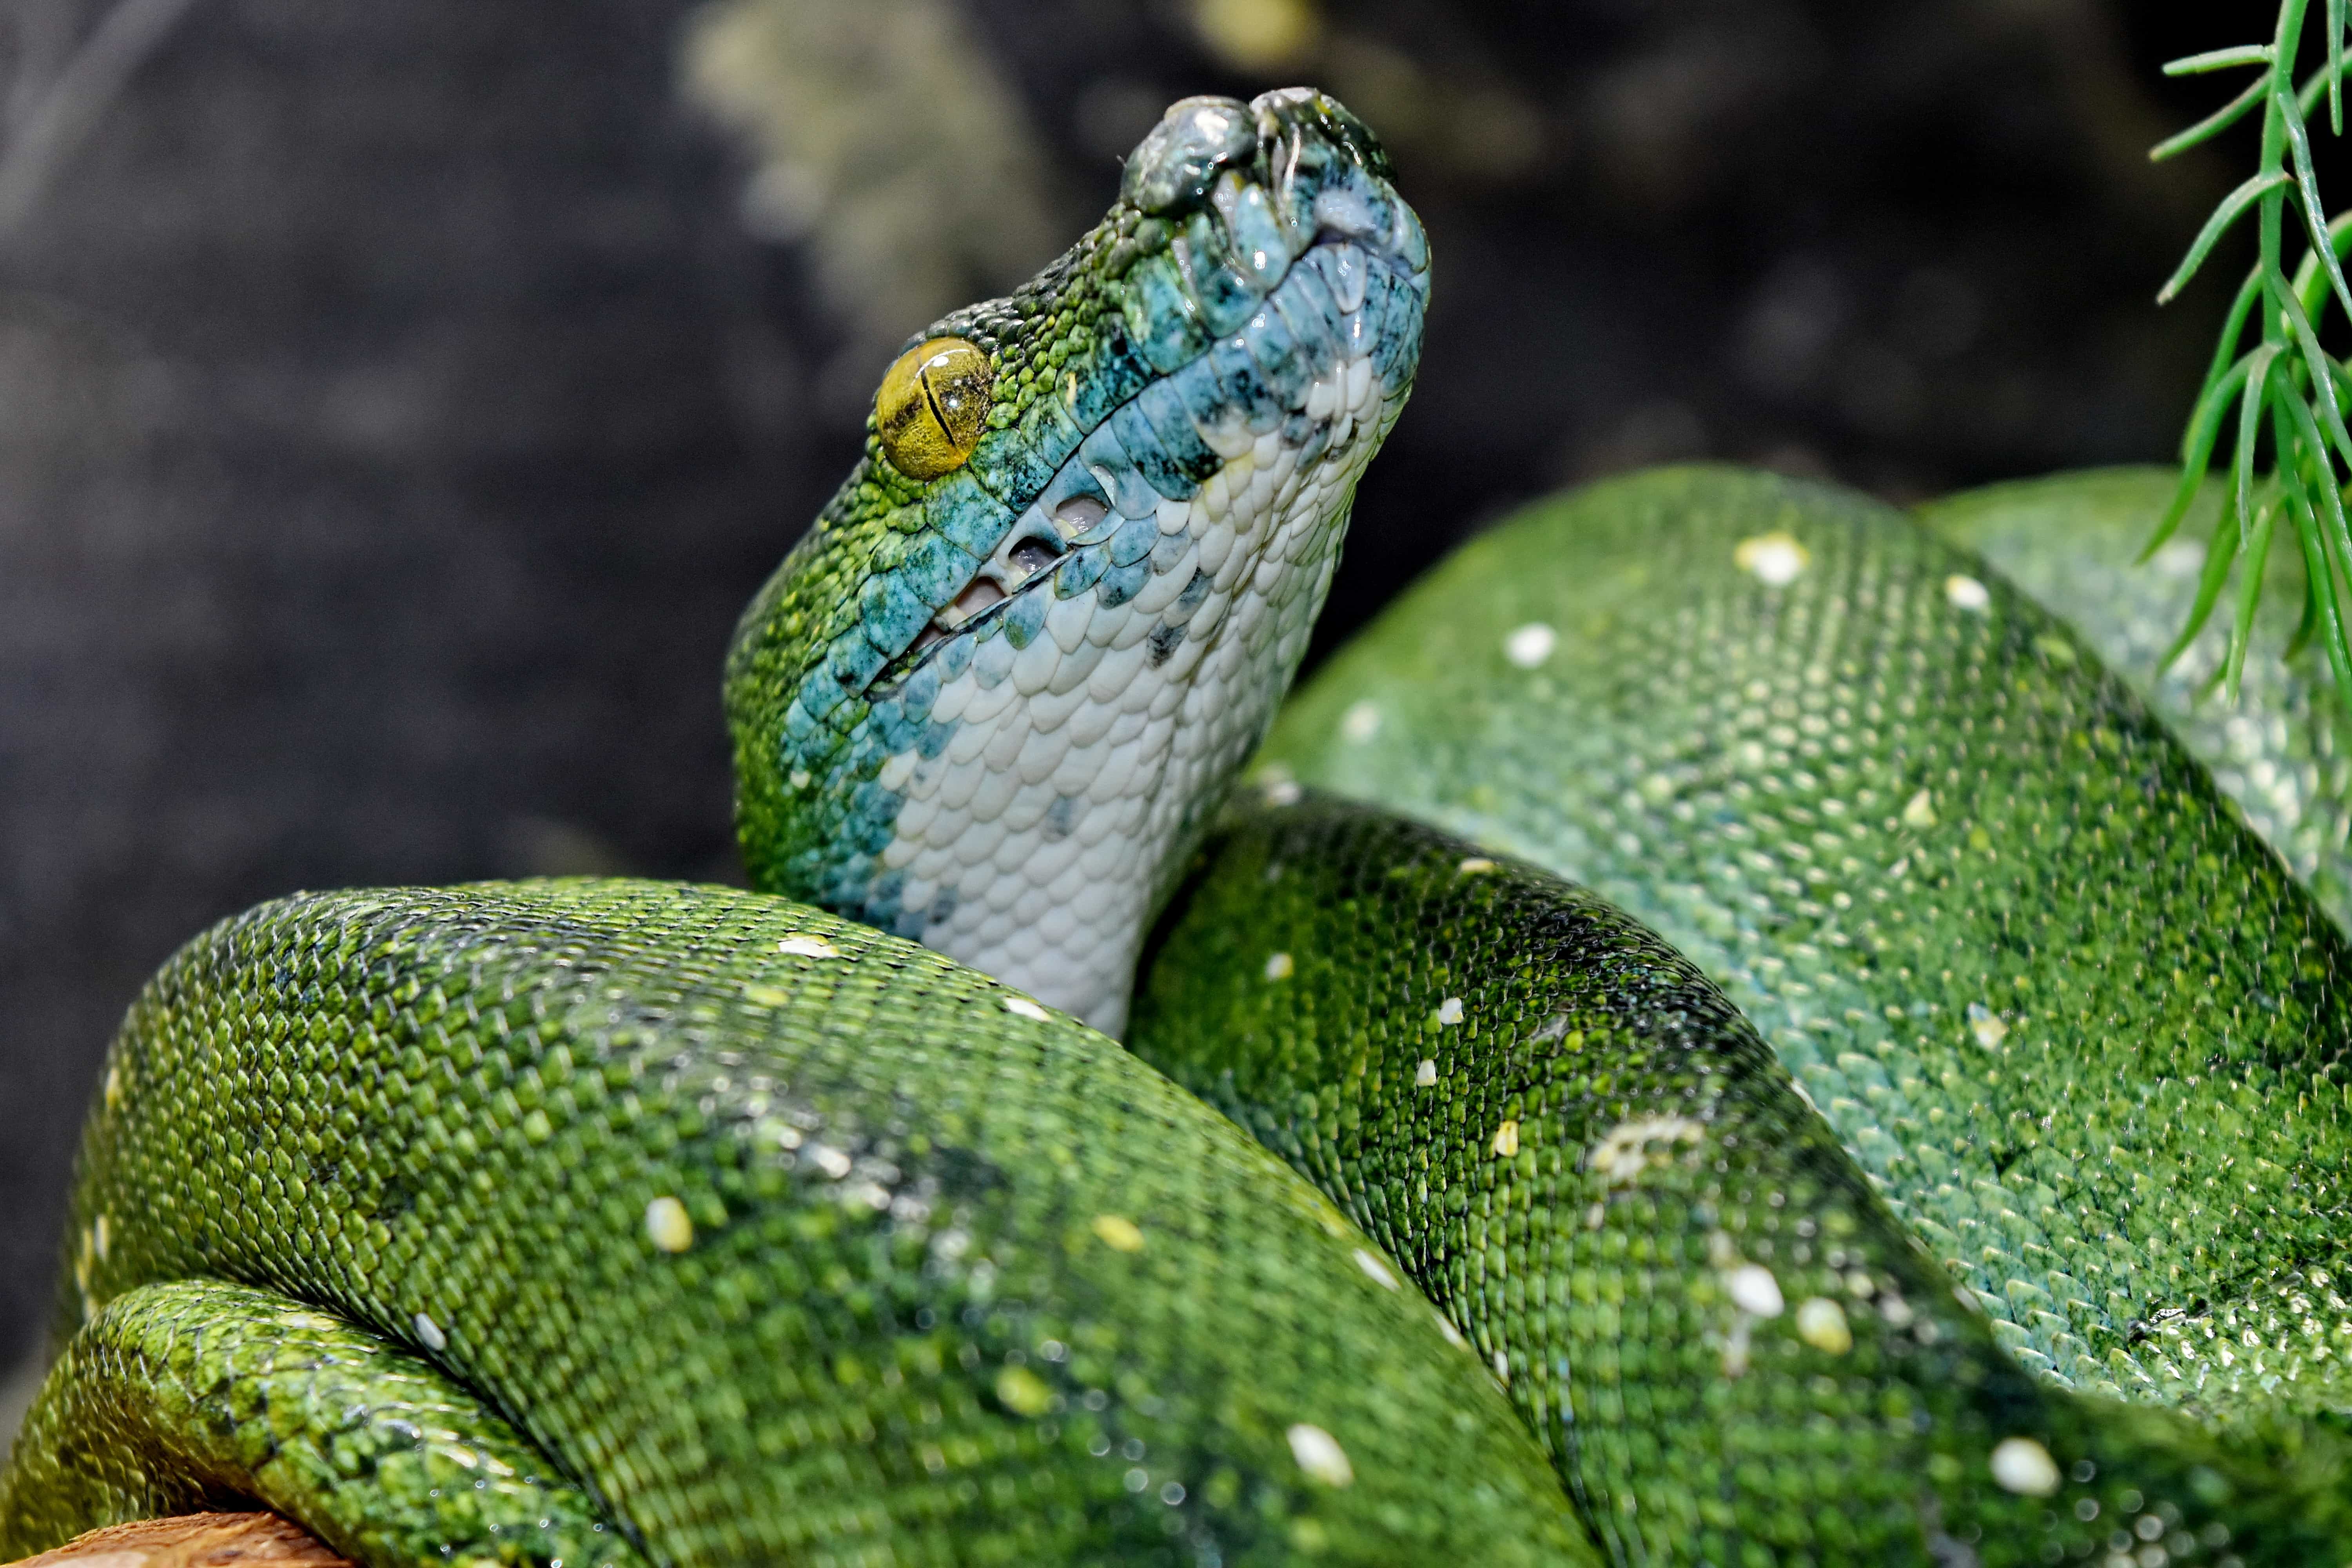 Free picture: camouflage, detail, green snake, head, python, animal, animals,  ecology